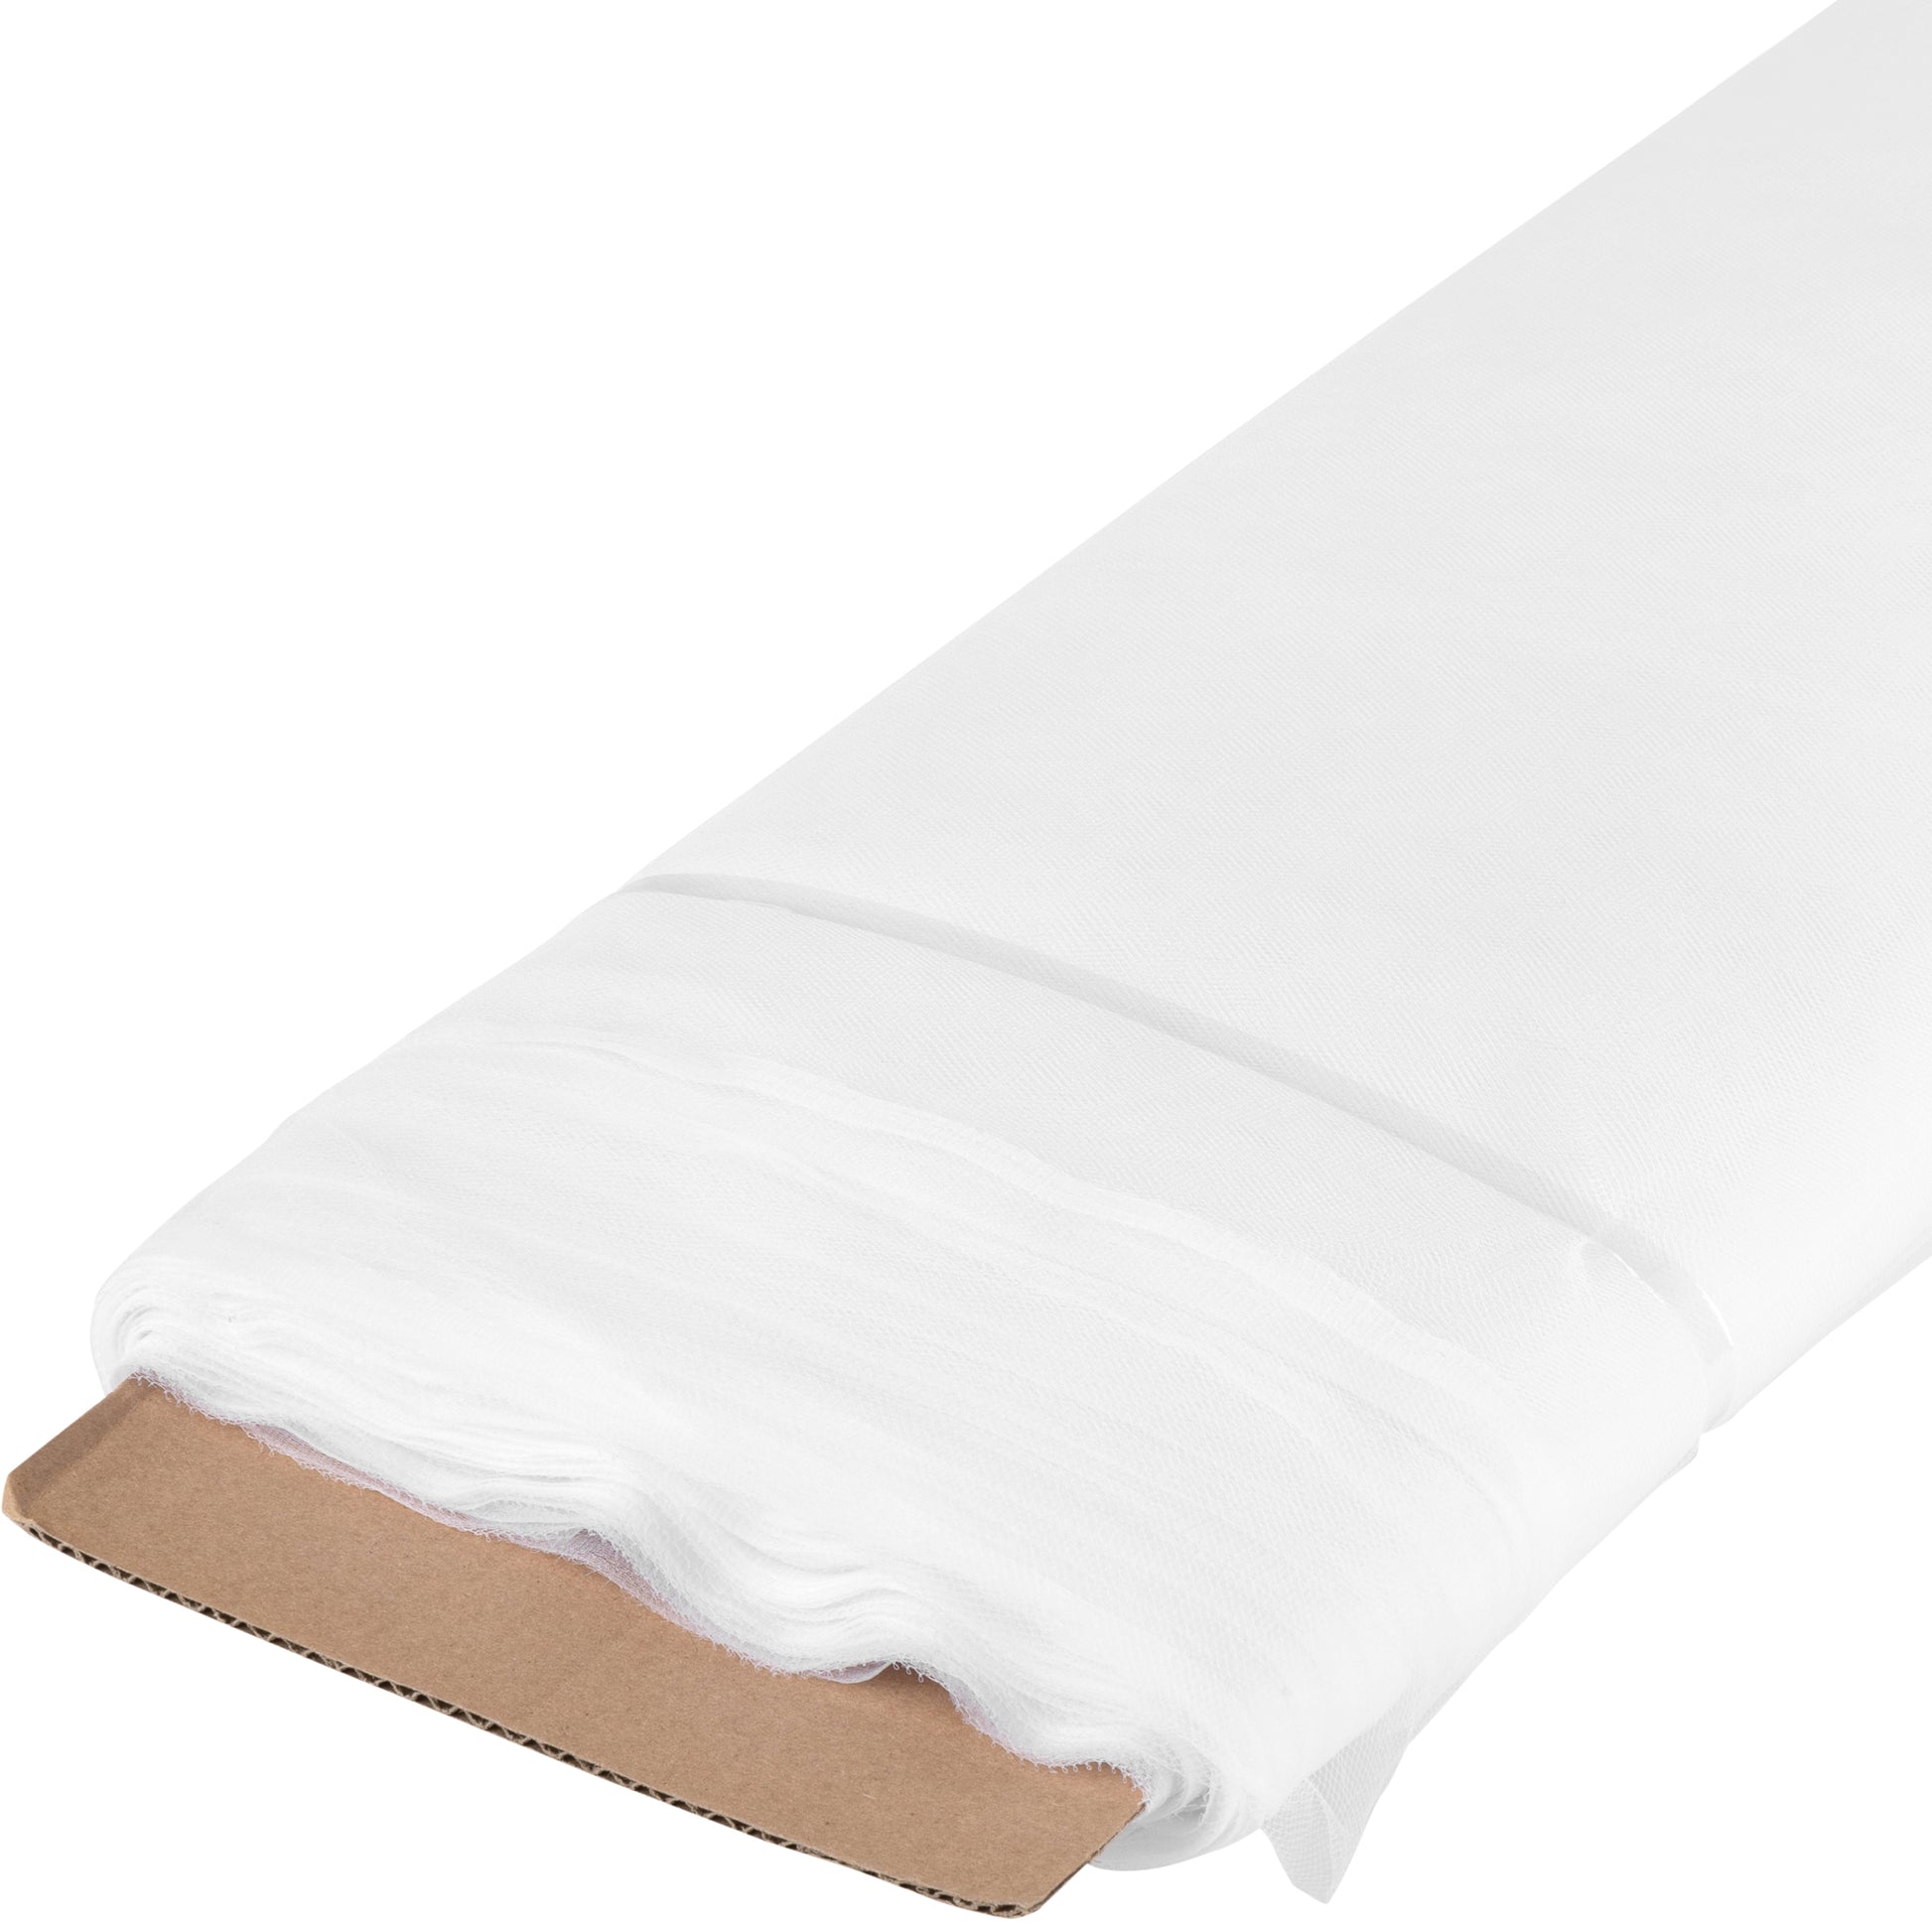 Soft Tulle Fabric Roll 54 x 40 yds - White– CV Linens